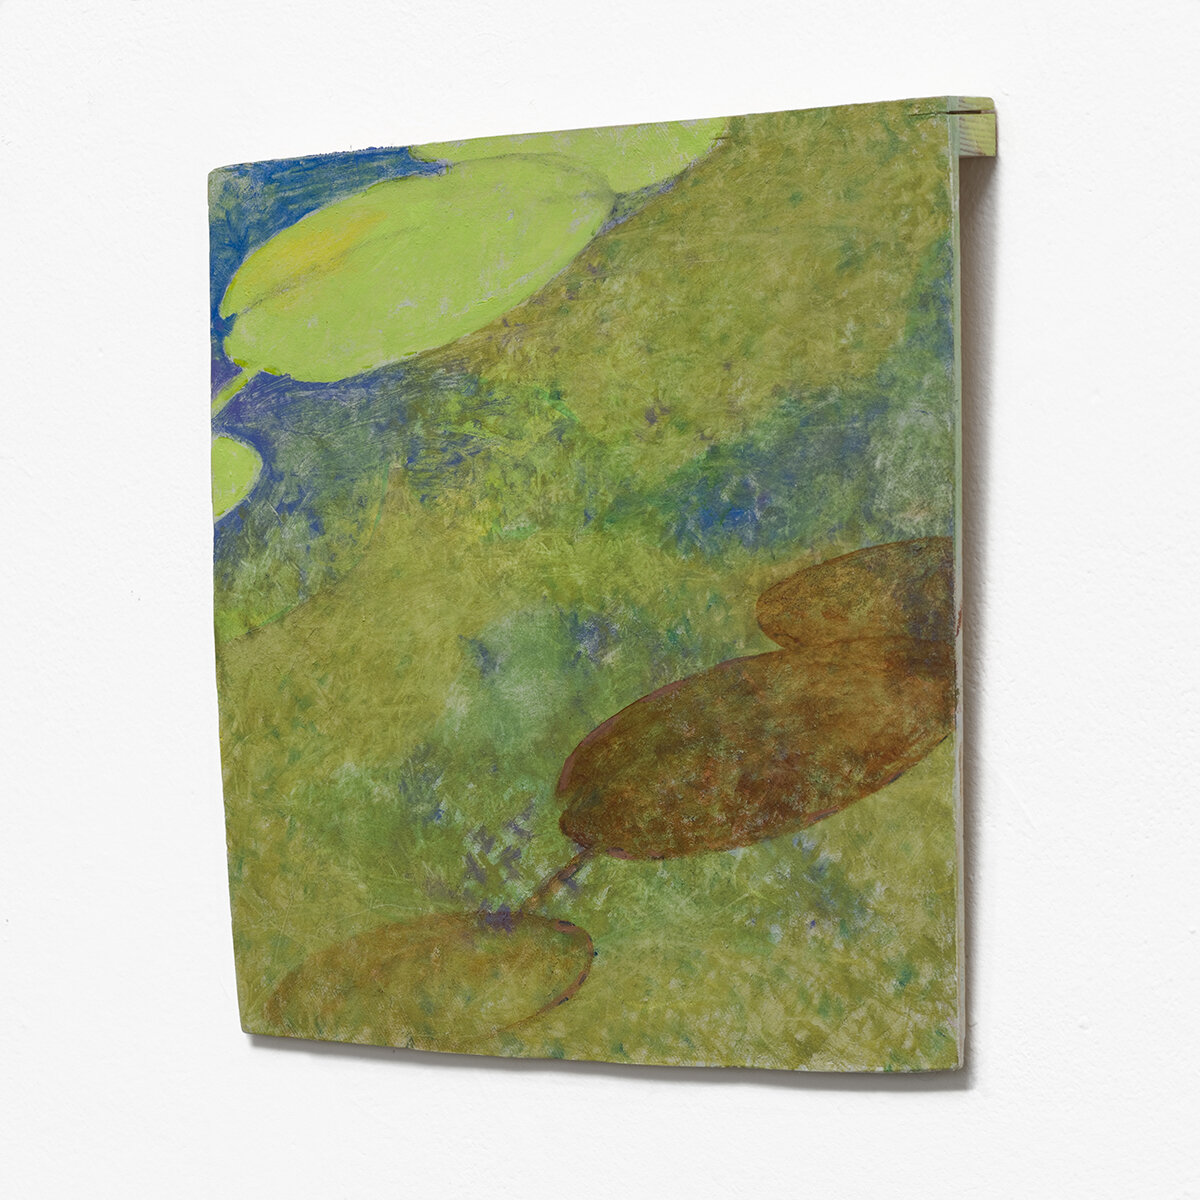   Study for Pond on Wheels XII    Oil on canvas on wood  12 ½ x 13 ½ x 1 inches  32 x 34 x 2 ½ cm 2019 